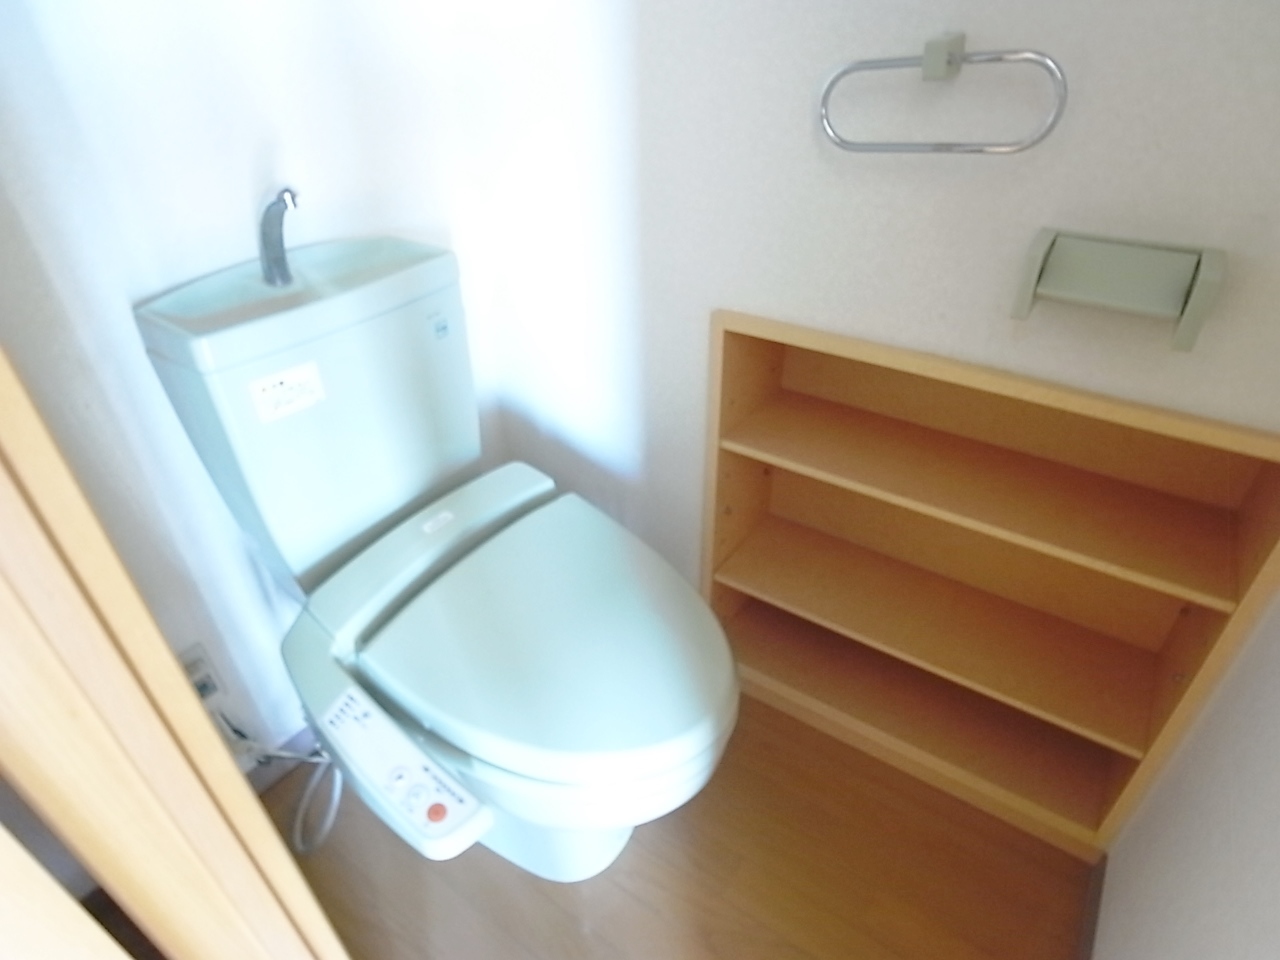 Toilet. It is useful in the toilet with a shelf ^^